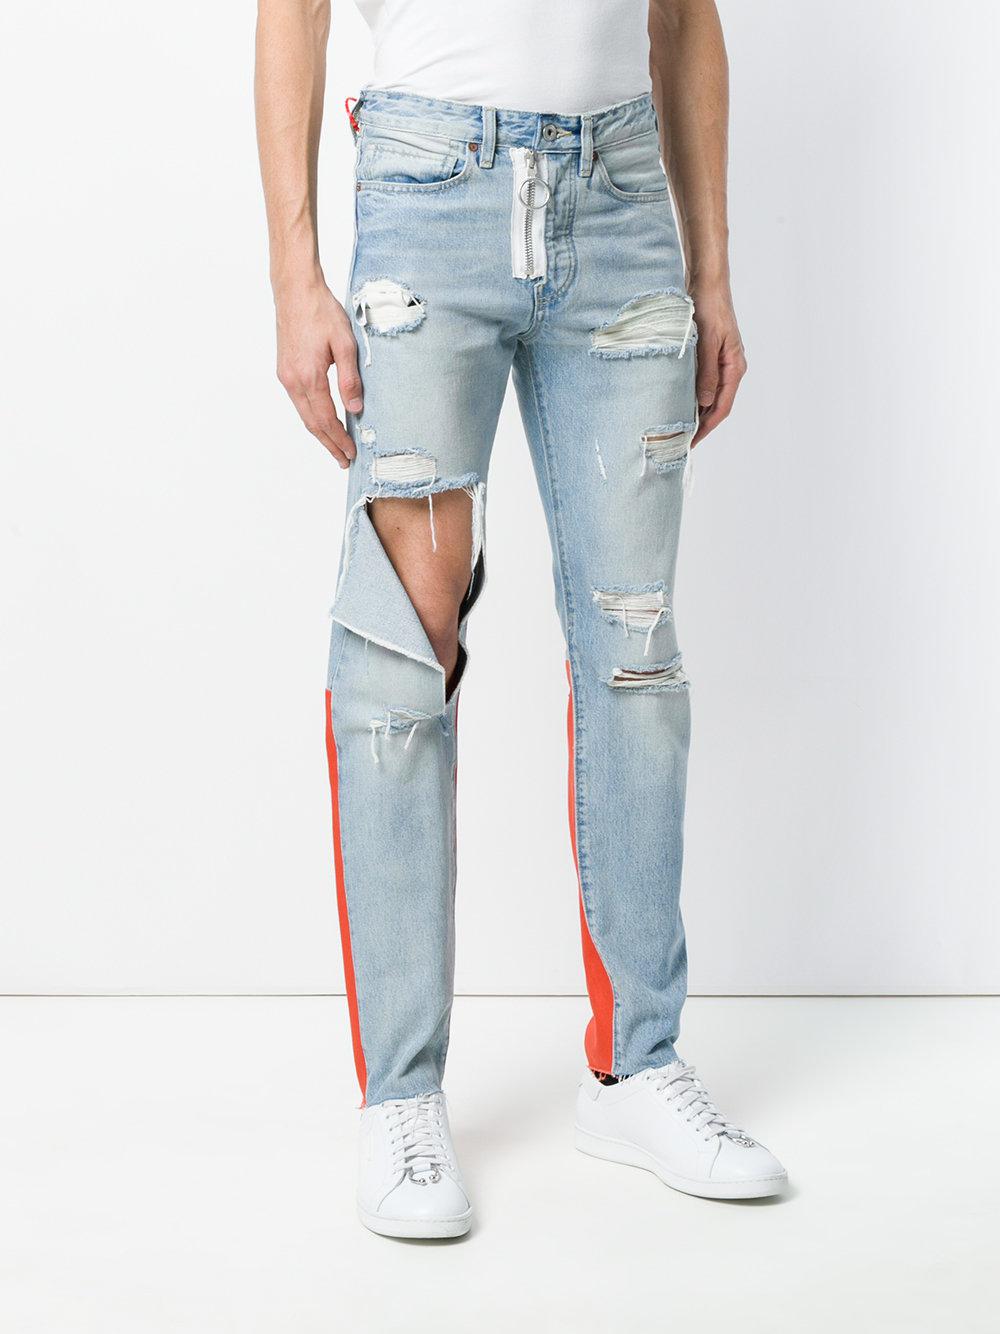 Off-White c/o Virgil Abloh Denim X Levi's Made & Crafted Slim Fit Jeans in  Blue for Men - Lyst